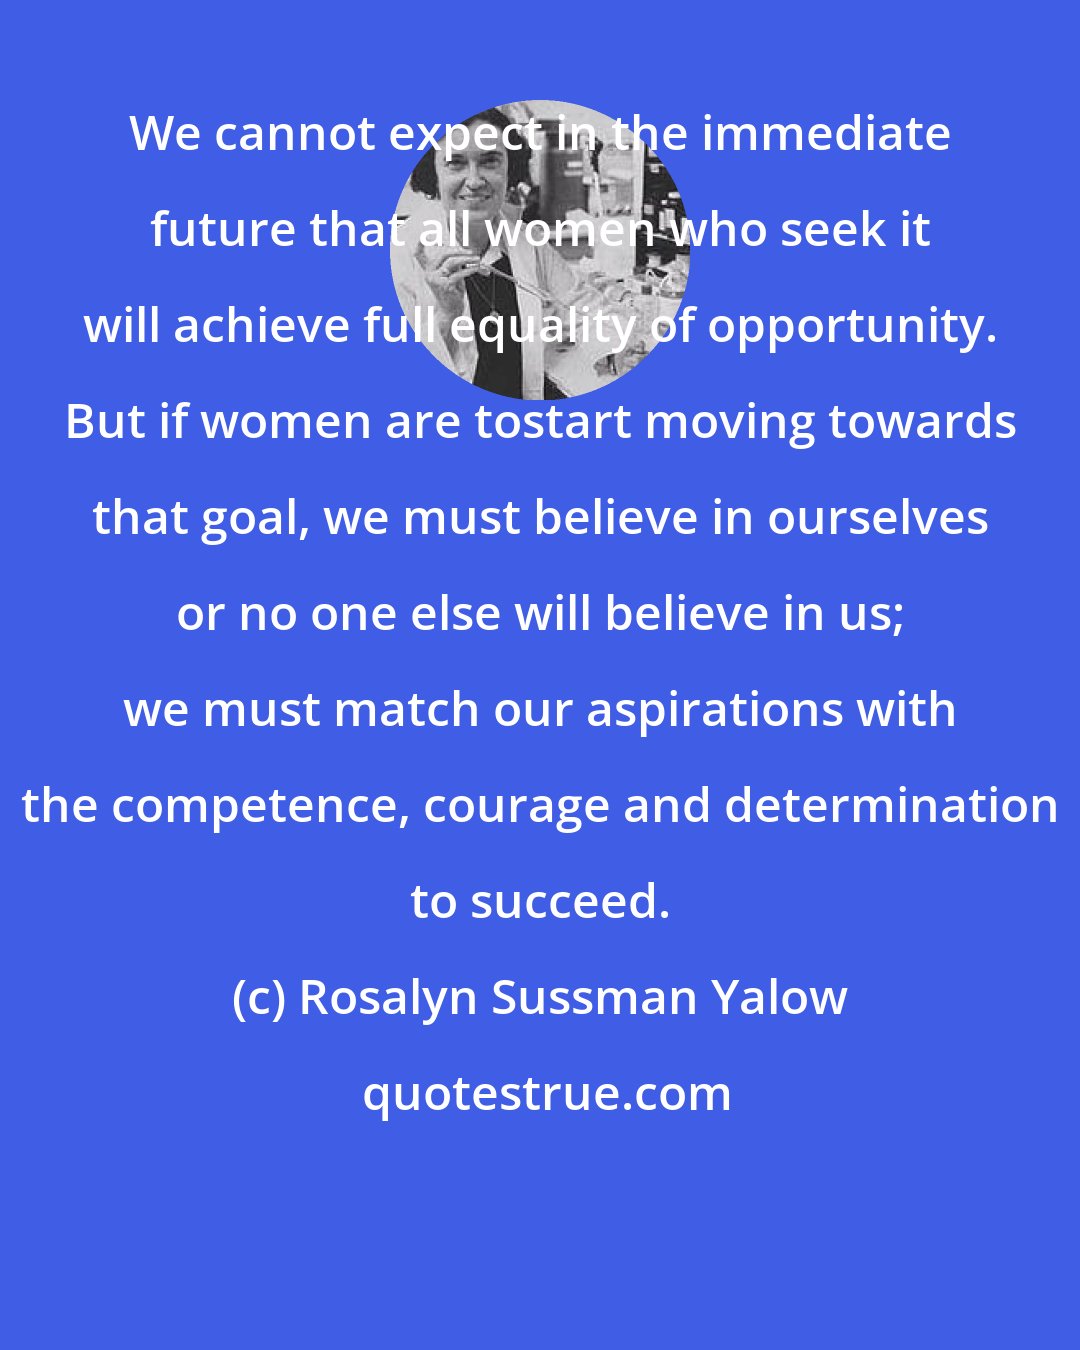 Rosalyn Sussman Yalow: We cannot expect in the immediate future that all women who seek it will achieve full equality of opportunity. But if women are tostart moving towards that goal, we must believe in ourselves or no one else will believe in us; we must match our aspirations with the competence, courage and determination to succeed.